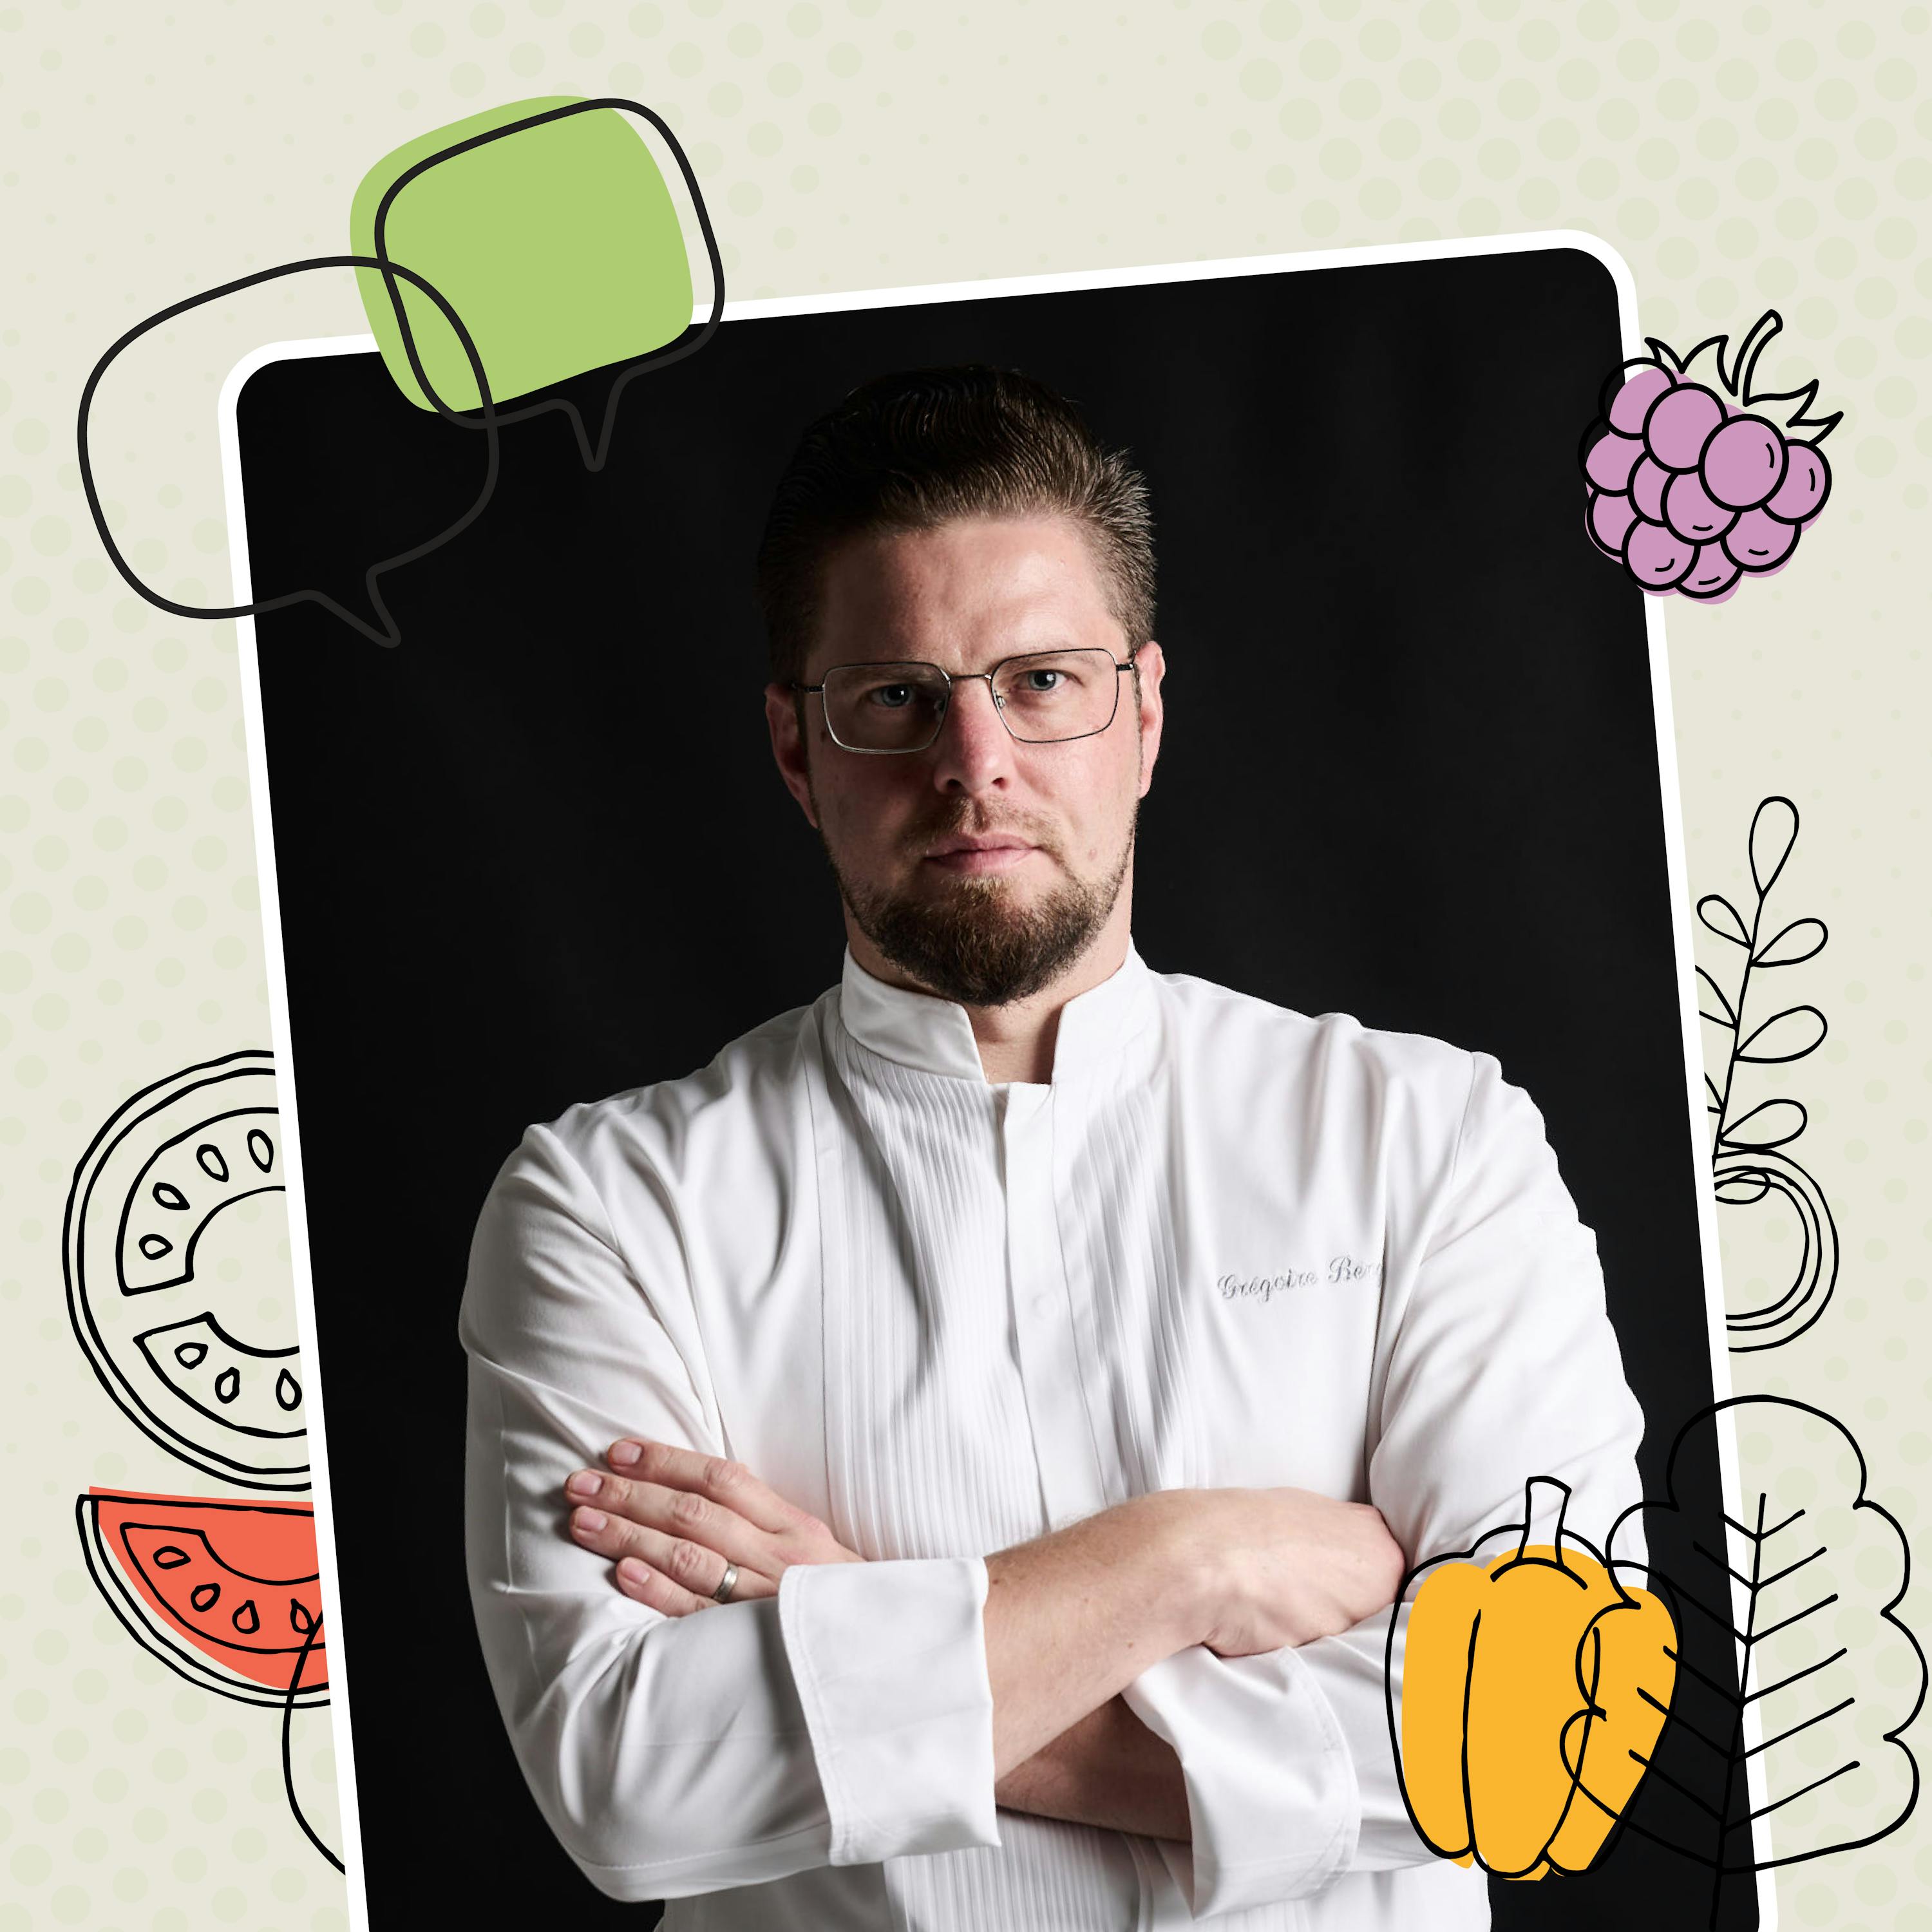 “Taste is and isn’t subjective”, with Chef Gregoire Berger (the artist)